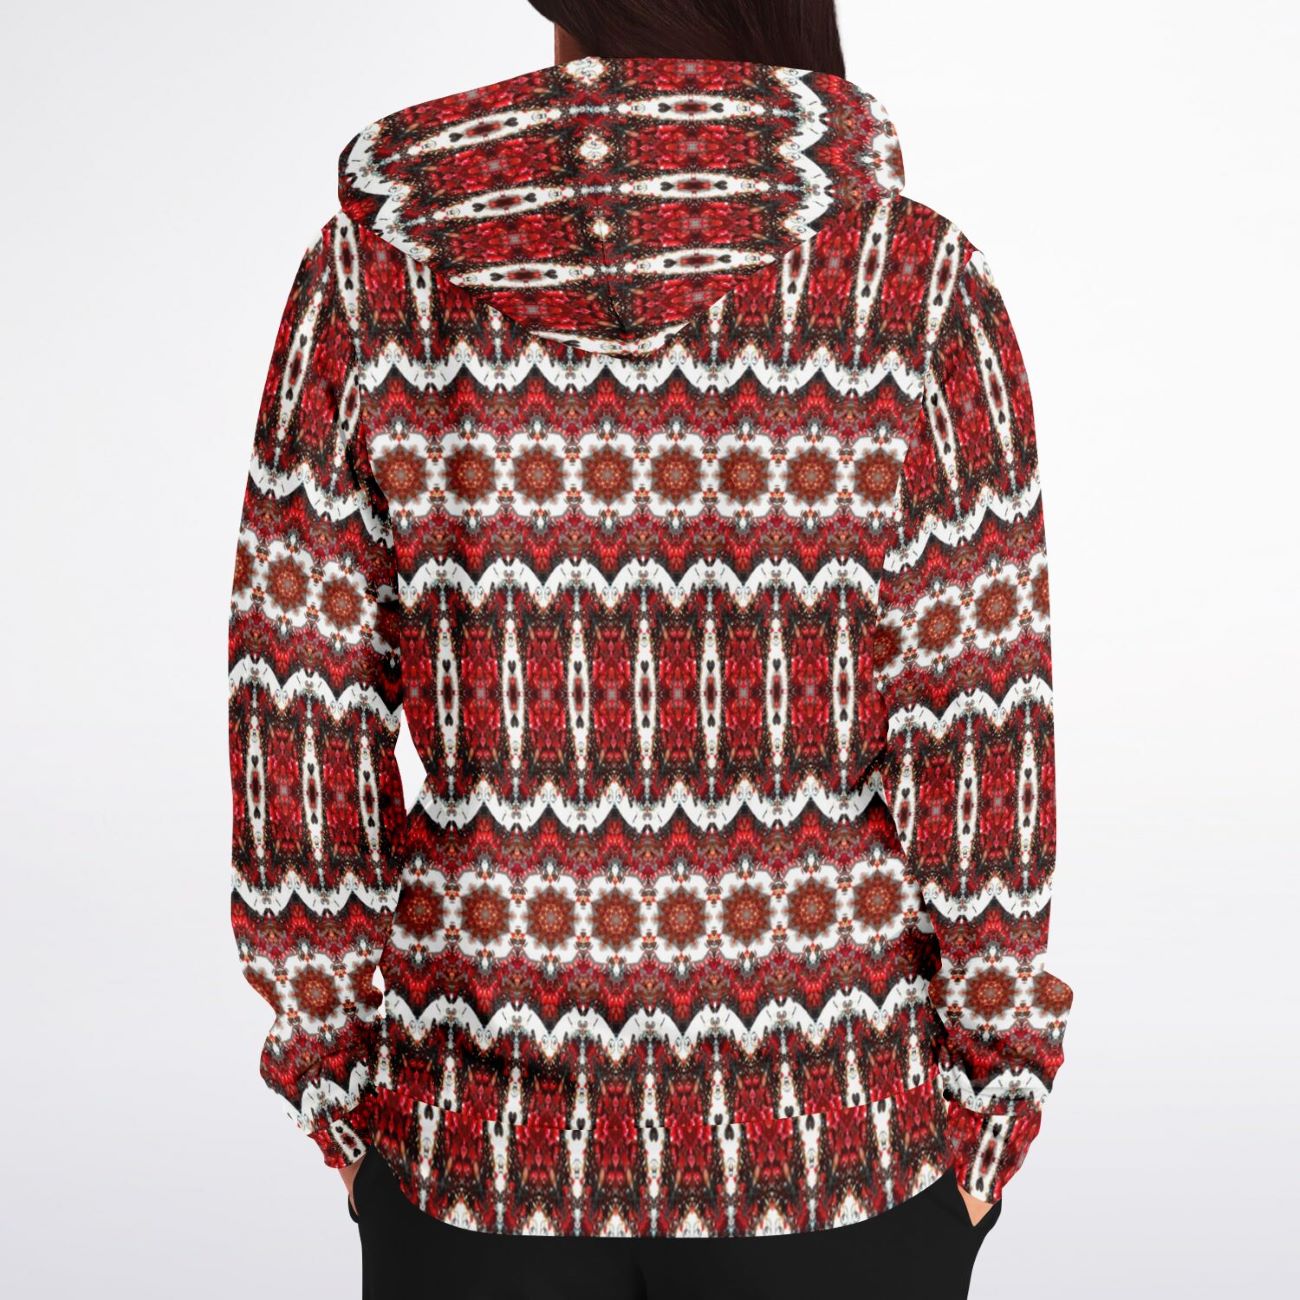 back view of the red and white hoodie